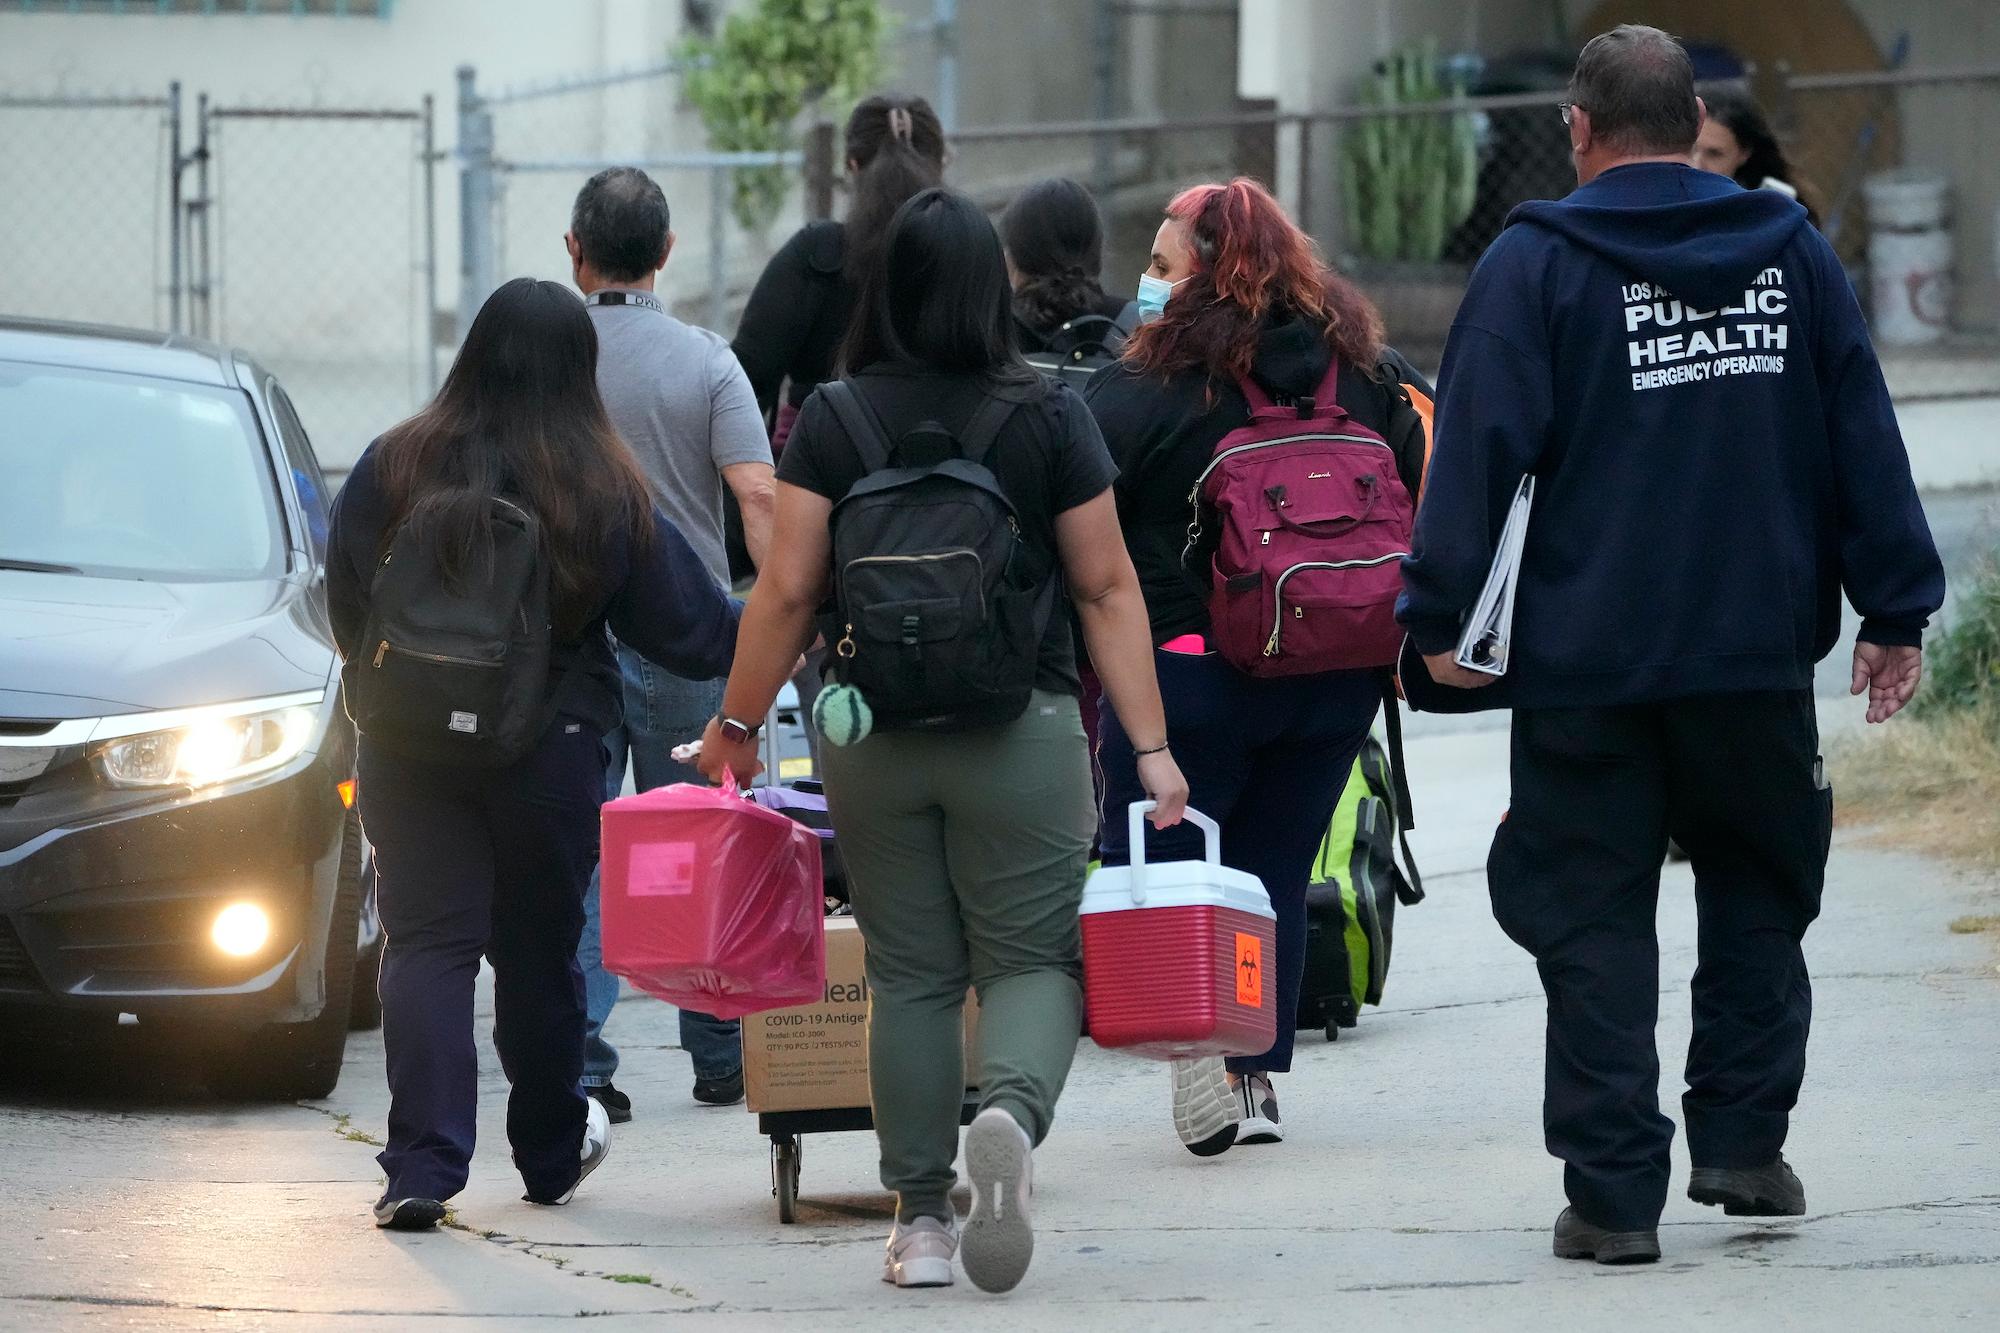 11th Bus of Illegal Migrants Arrived in Los Angeles From Texas